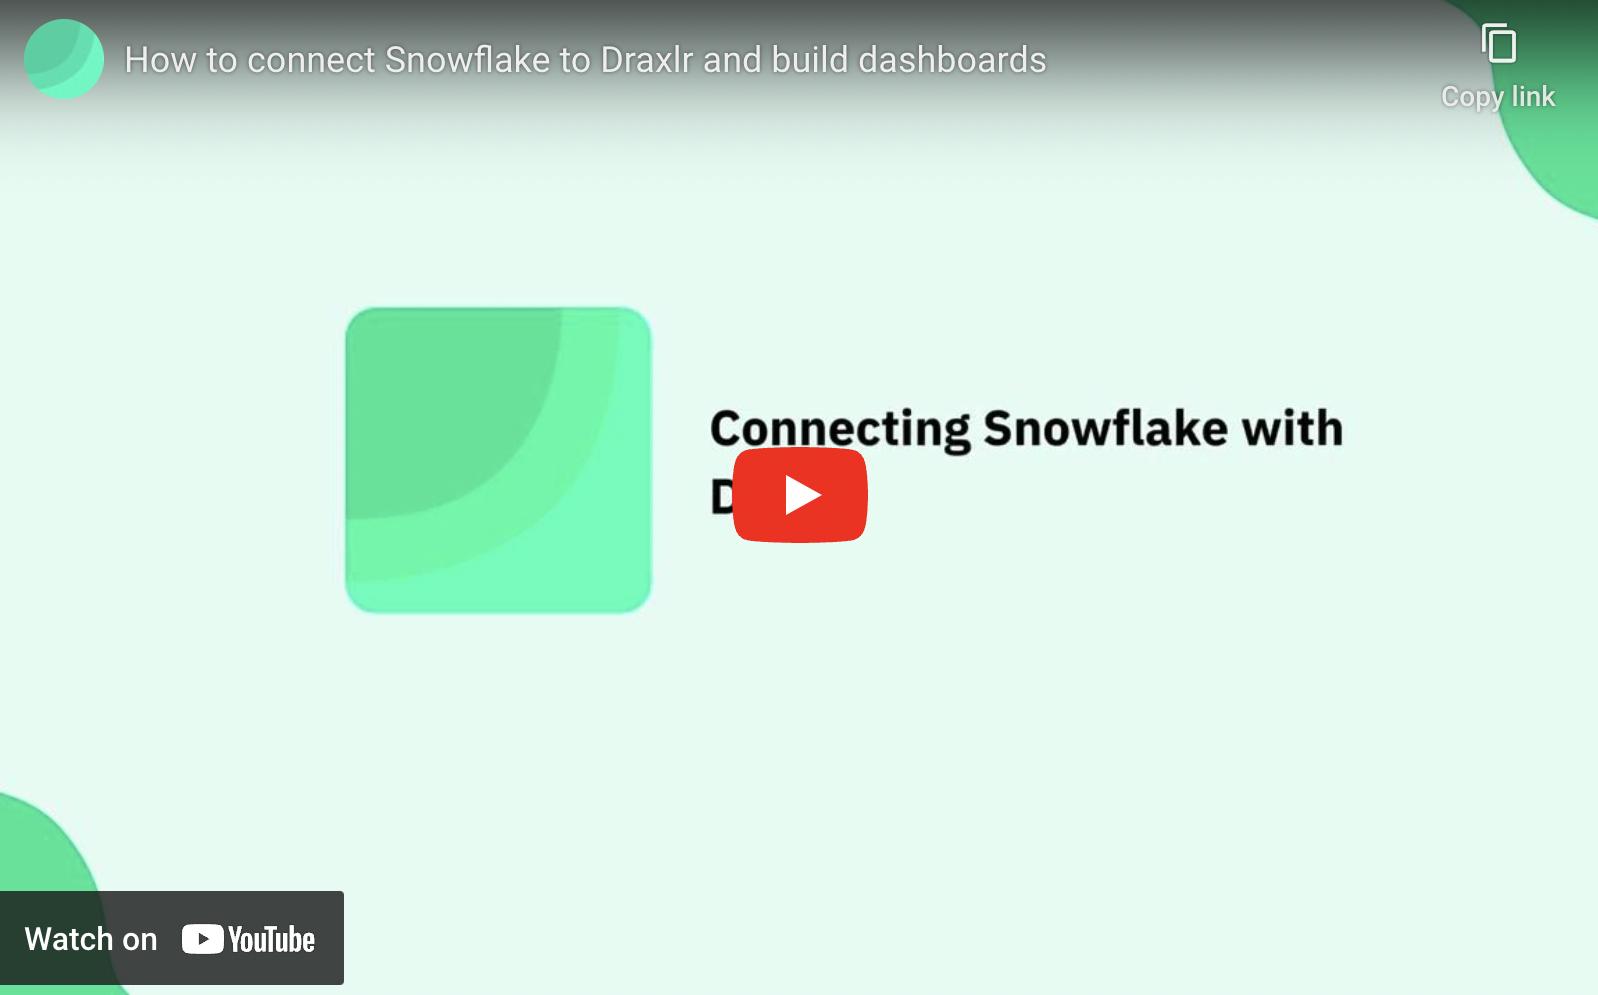 How to connect Snowflake to Draxlr